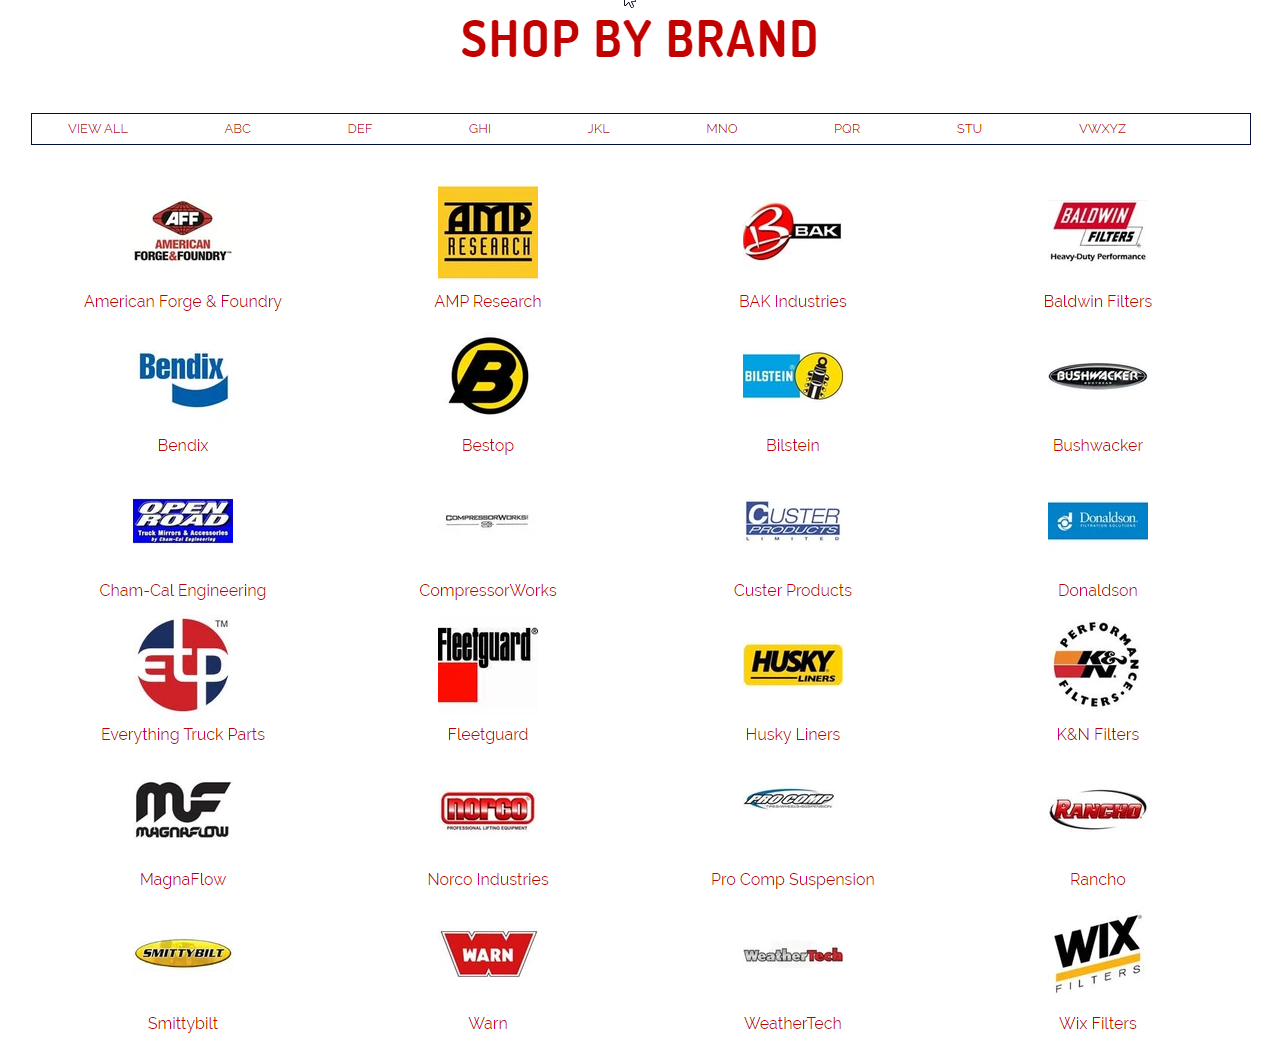 FIND YOUR FAVORITE BRAND WITH OUR SHOP BY BRANDS FEATURE.